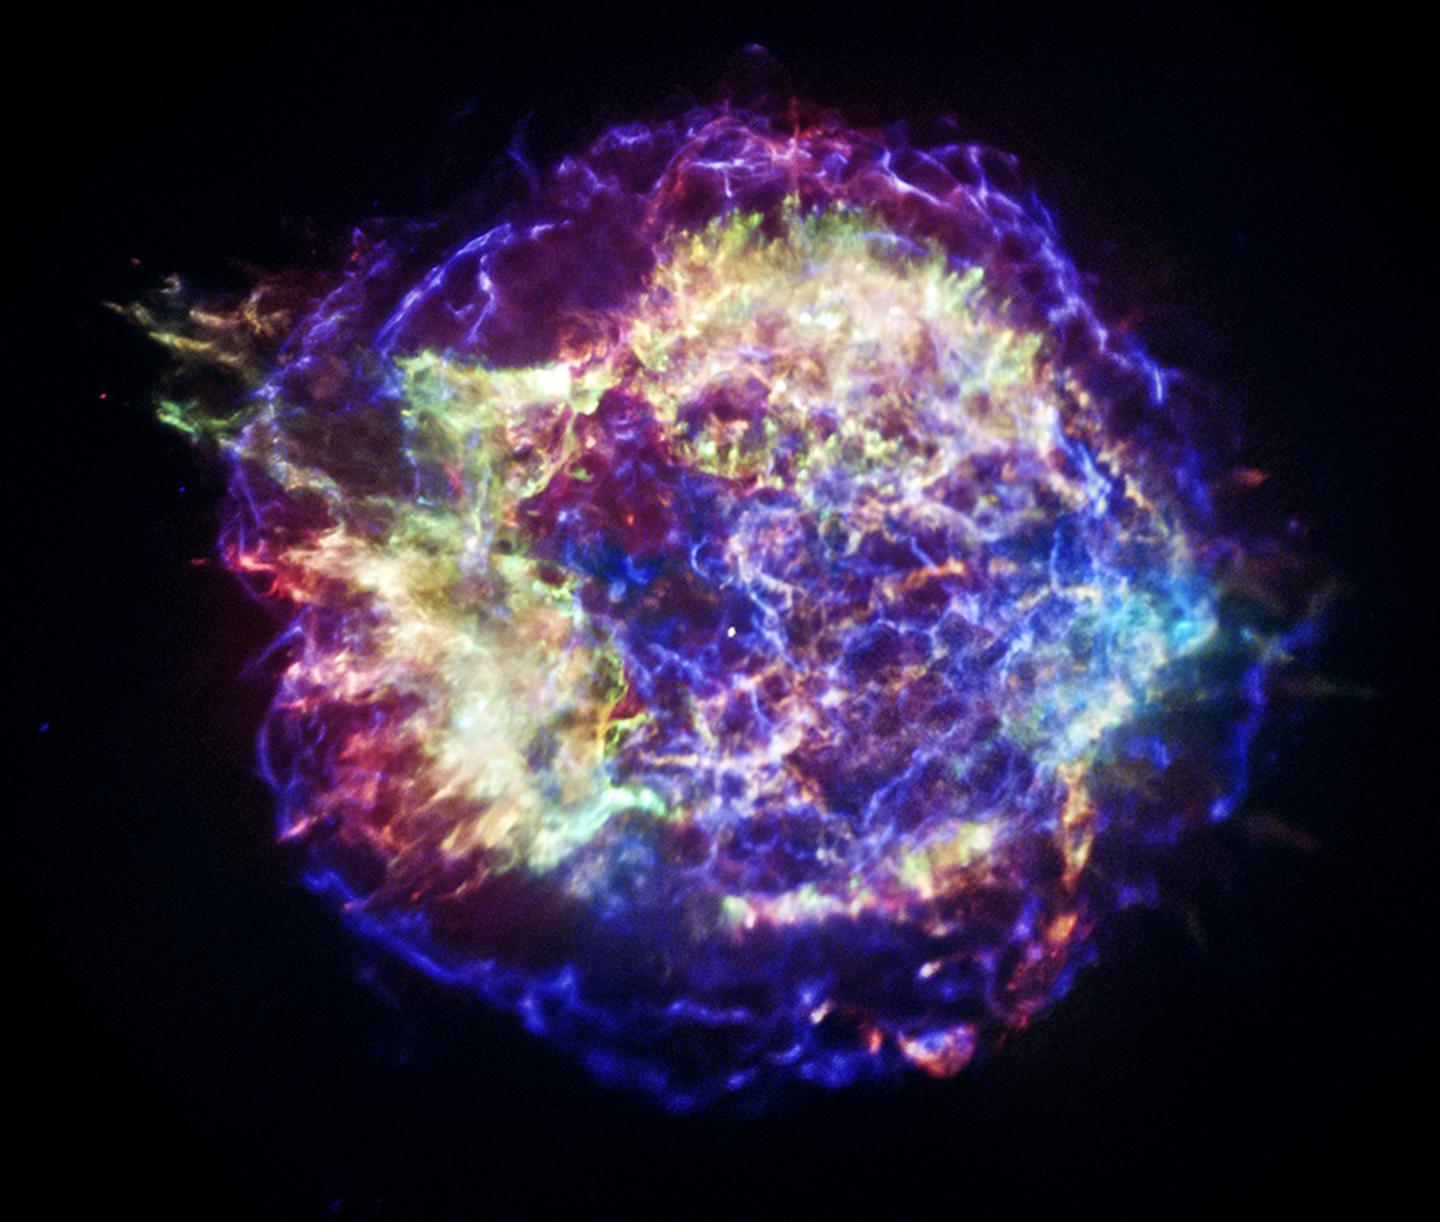 A 3-Color X-ray Image of the Supernova Remmant Cassiopeia A